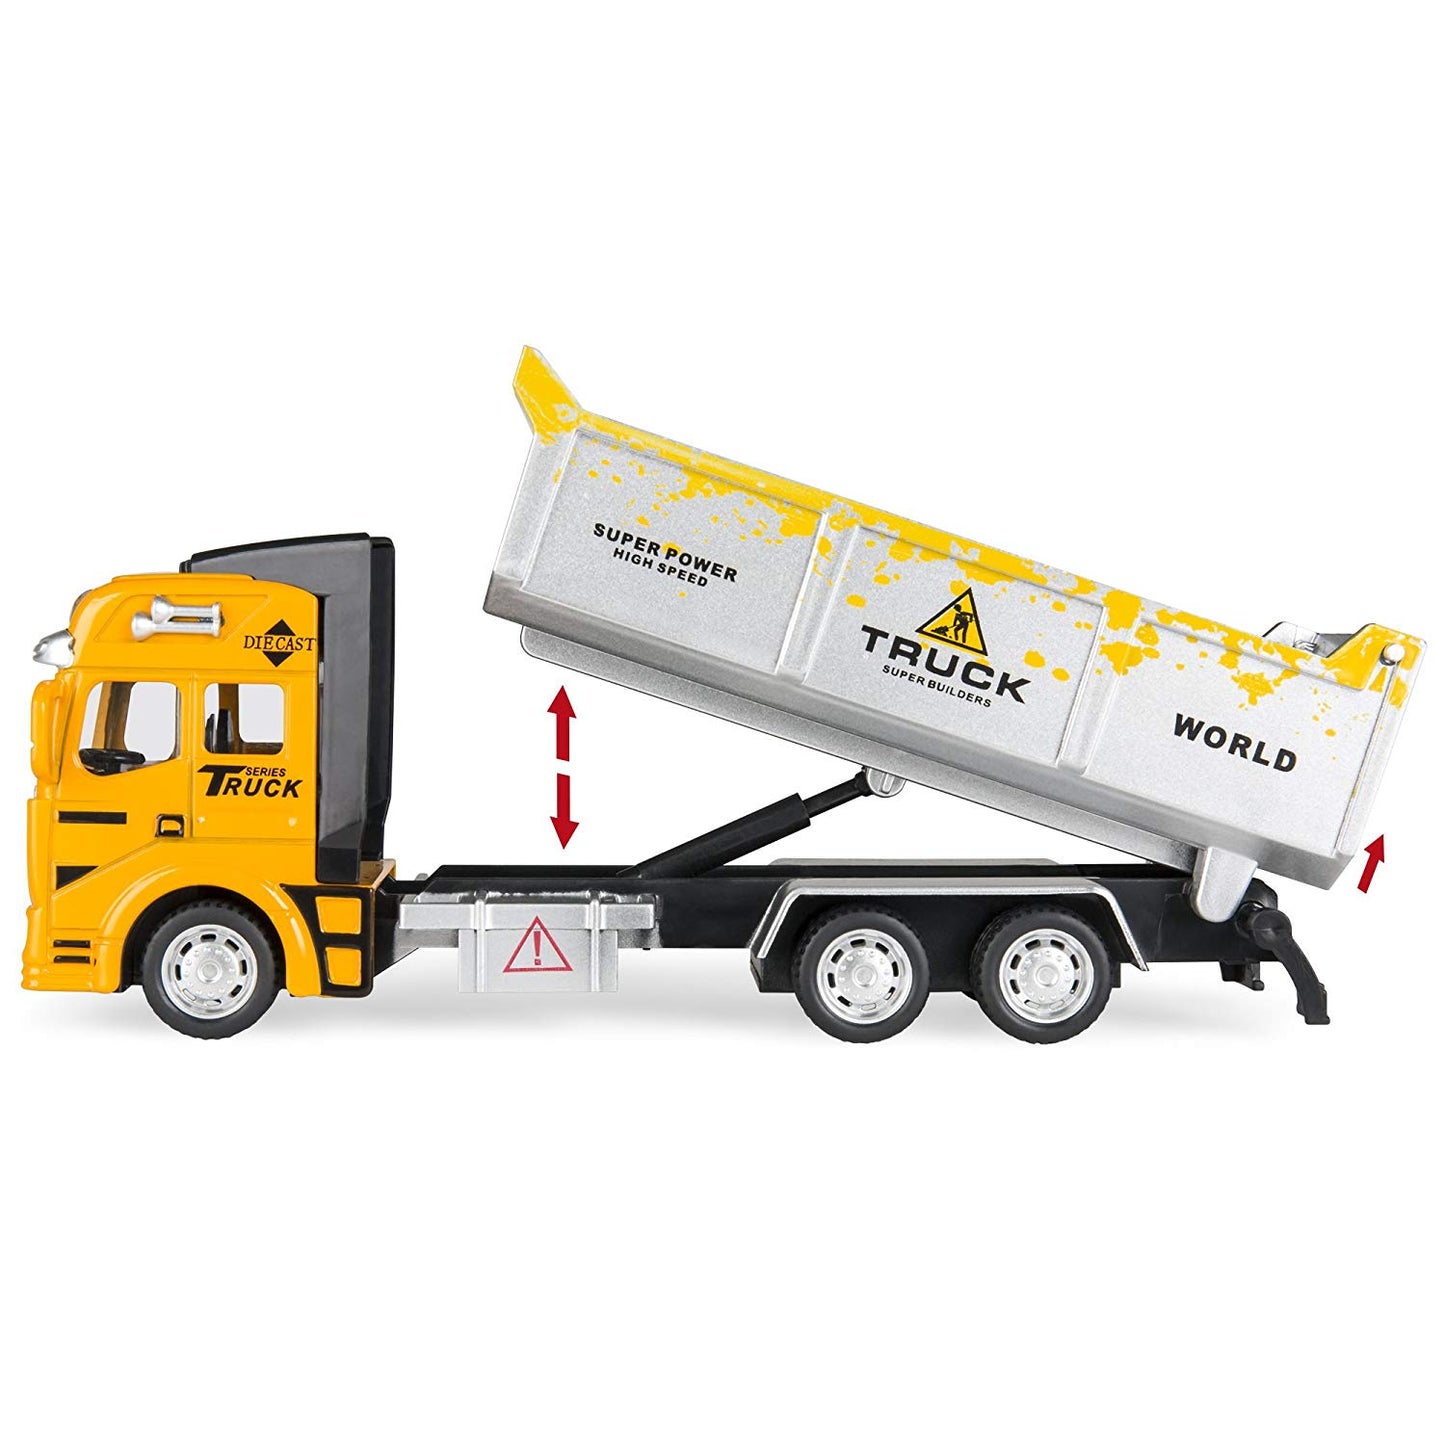 7.5in Set of 3 Friction-Powered Construction Toy Trucks w/ Excavator, Dump Truck, Cement Truck